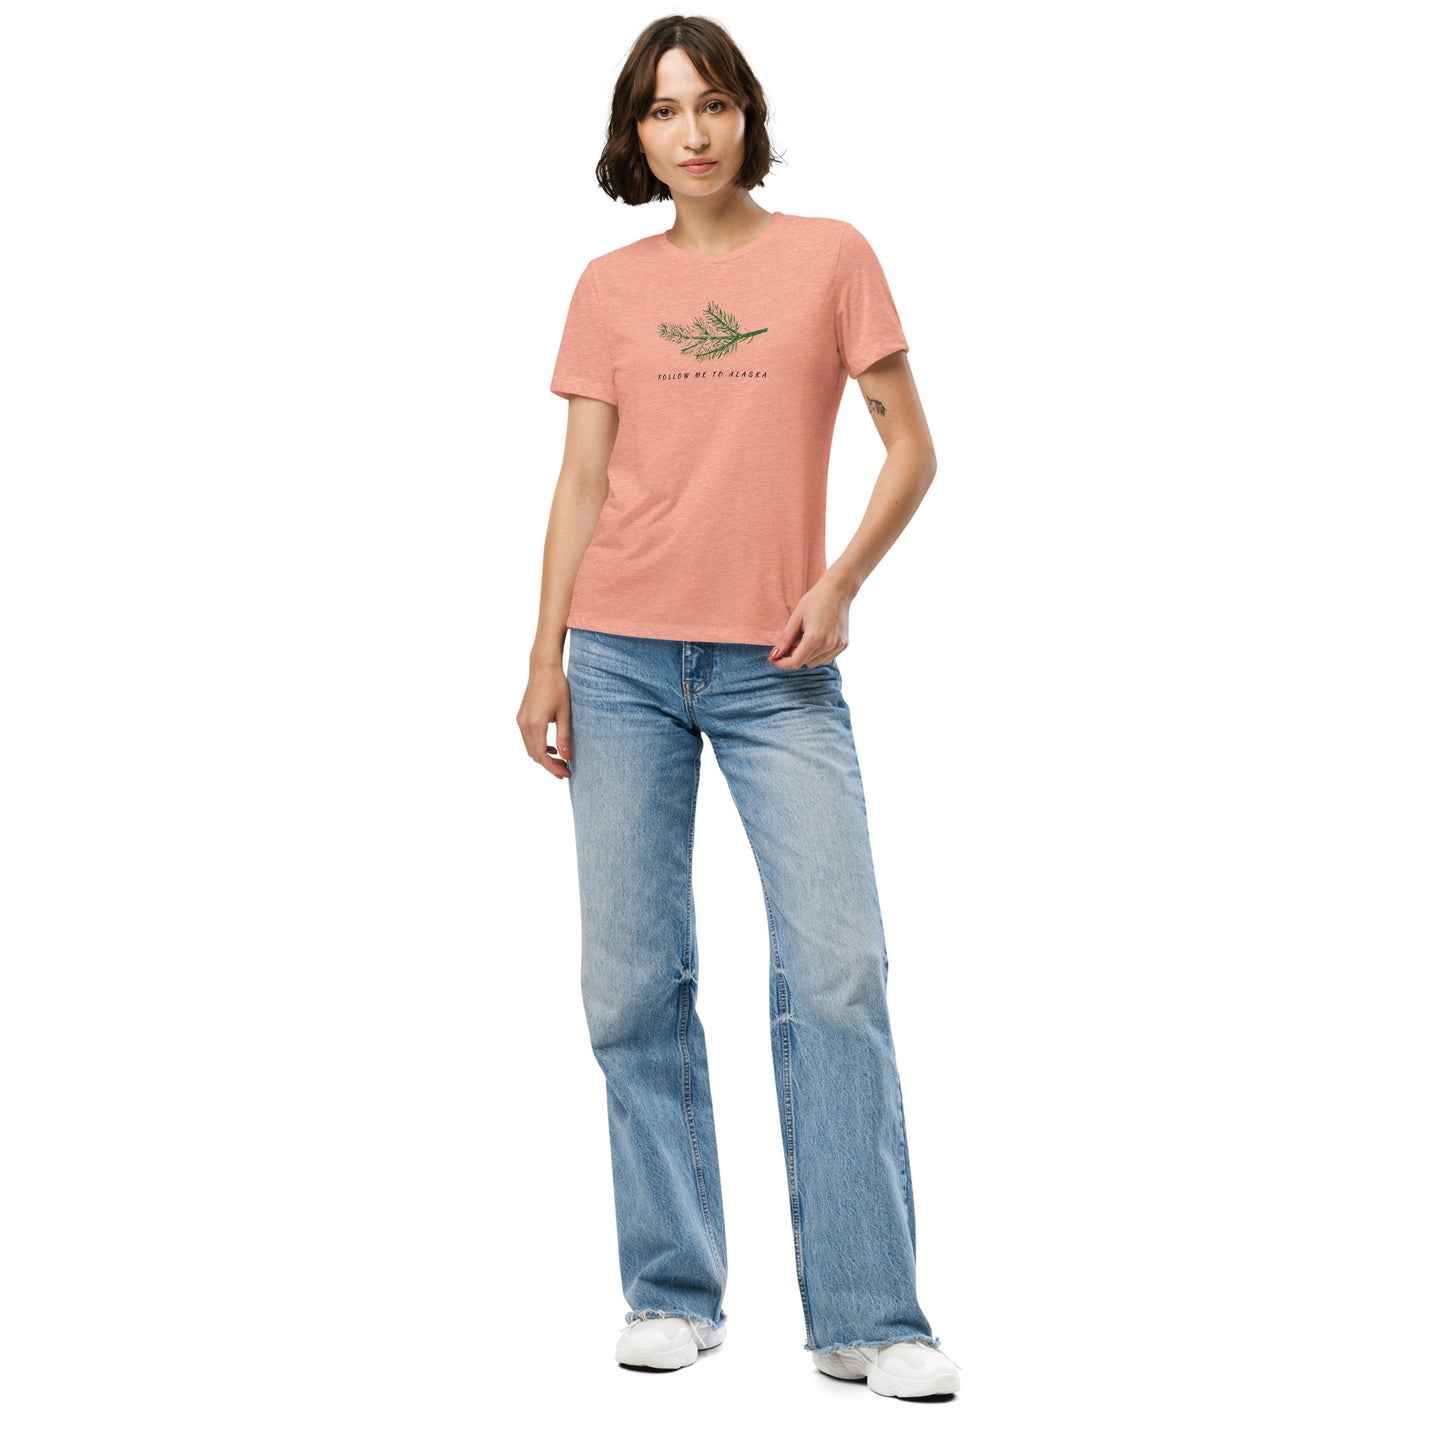 Women’s Relaxed Tri-Blend -Tshirt with Spruce Branch